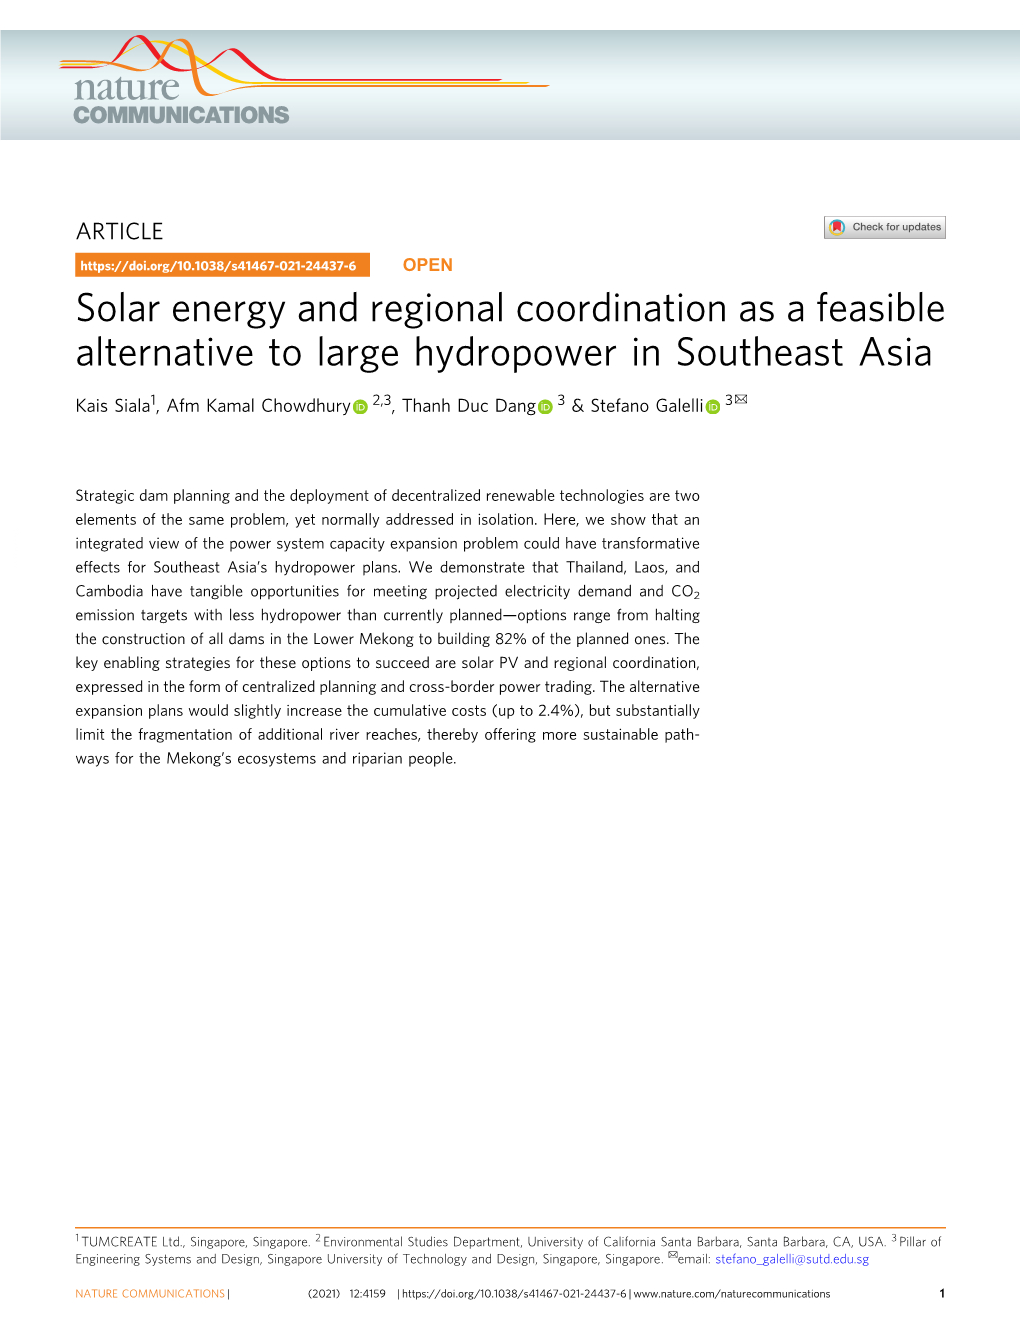 Solar Energy and Regional Coordination As a Feasible Alternative to Large Hydropower in Southeast Asia